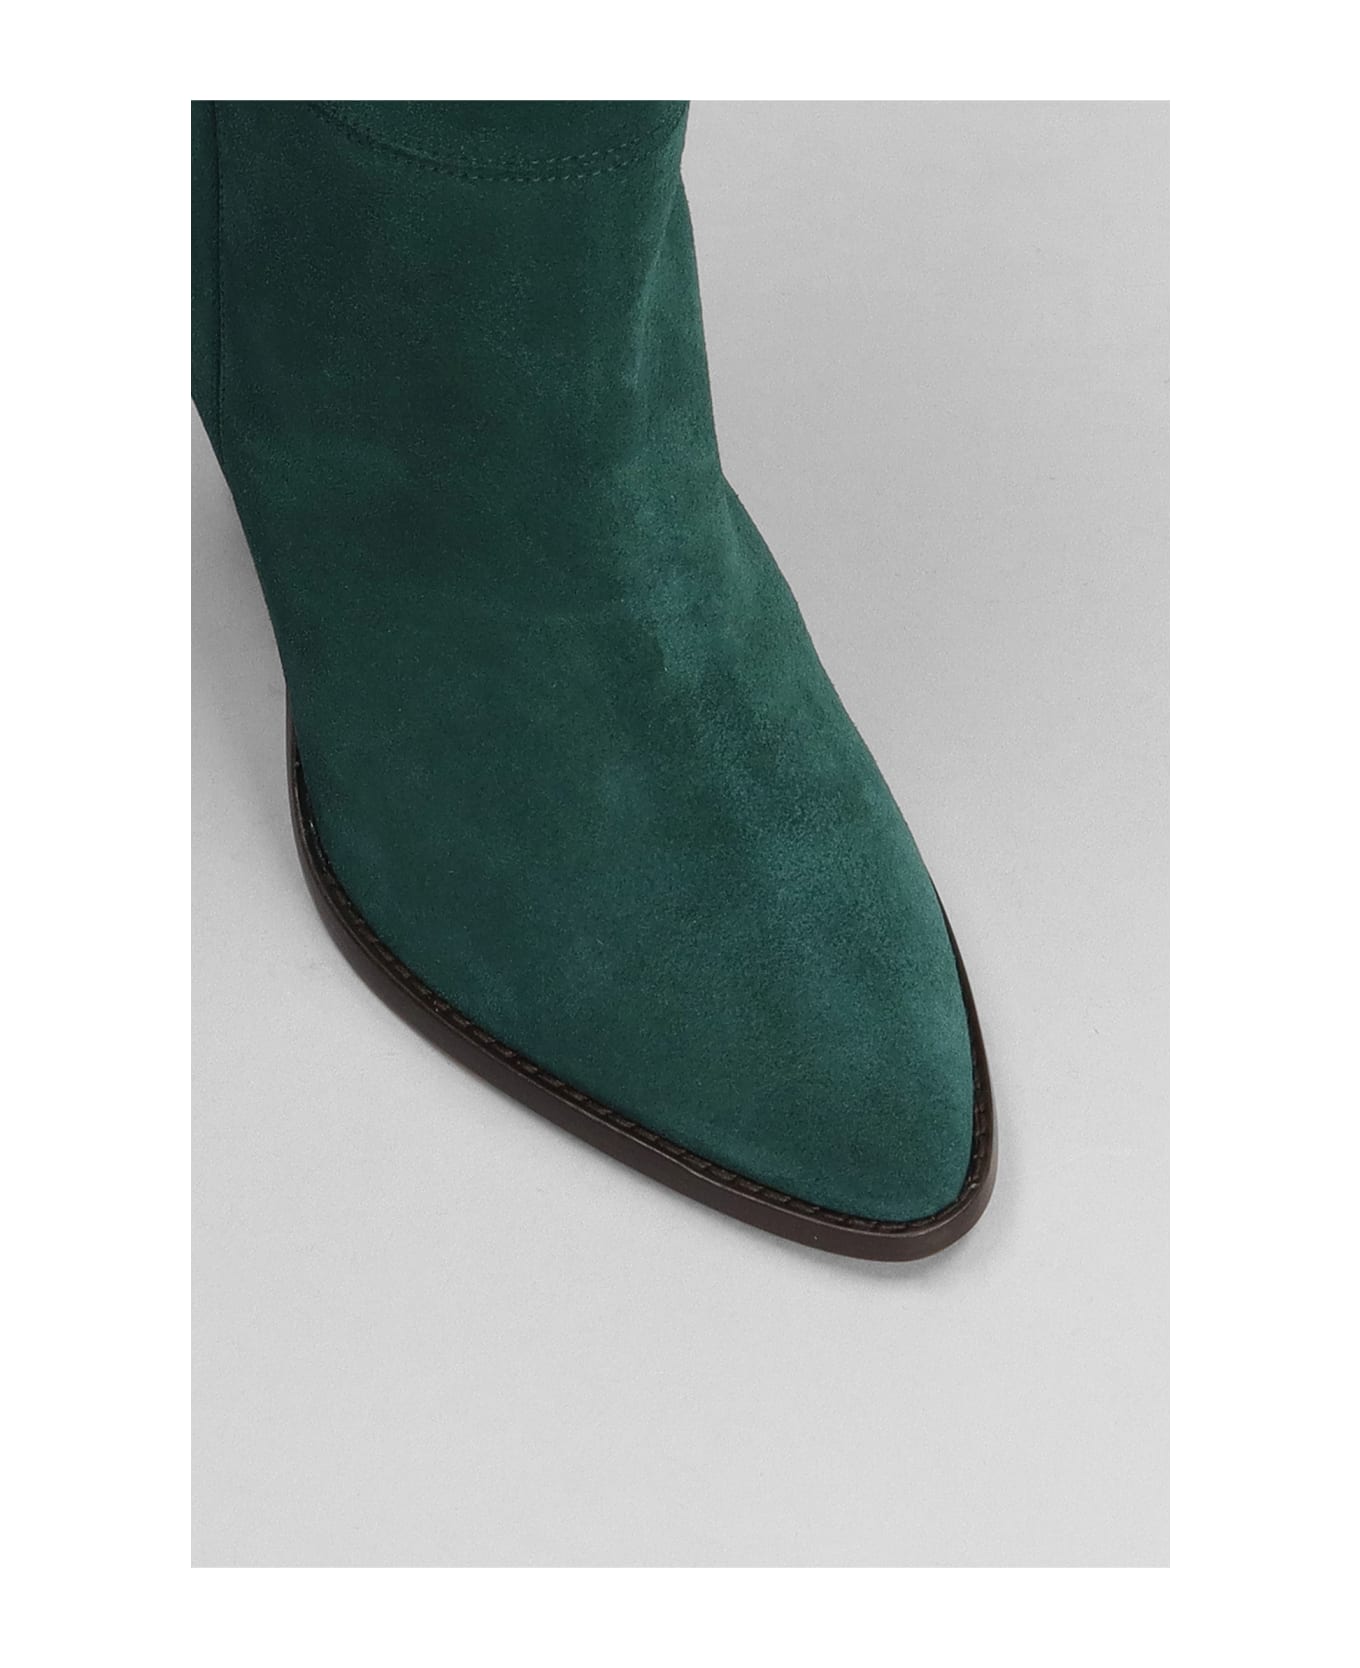 Isabel Marant Rouxa High Heels Ankle Boots - green